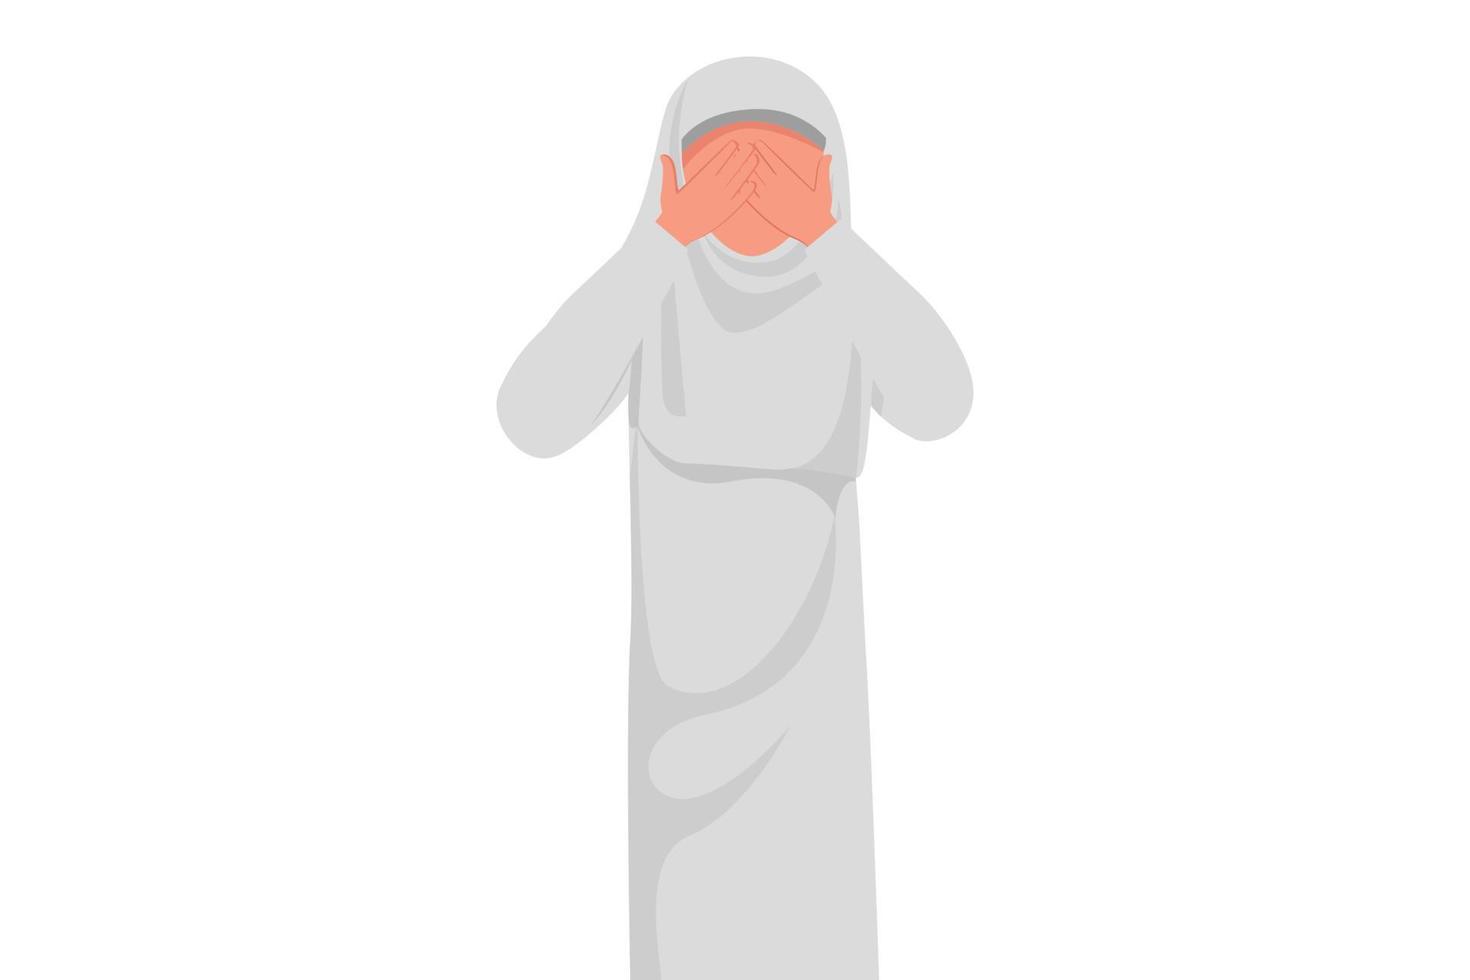 Business design drawing Arabian businesswoman closes her eyes with hands, disgust and reluctance to see something. Fear or sadness, failed of business project. Flat cartoon style vector illustration